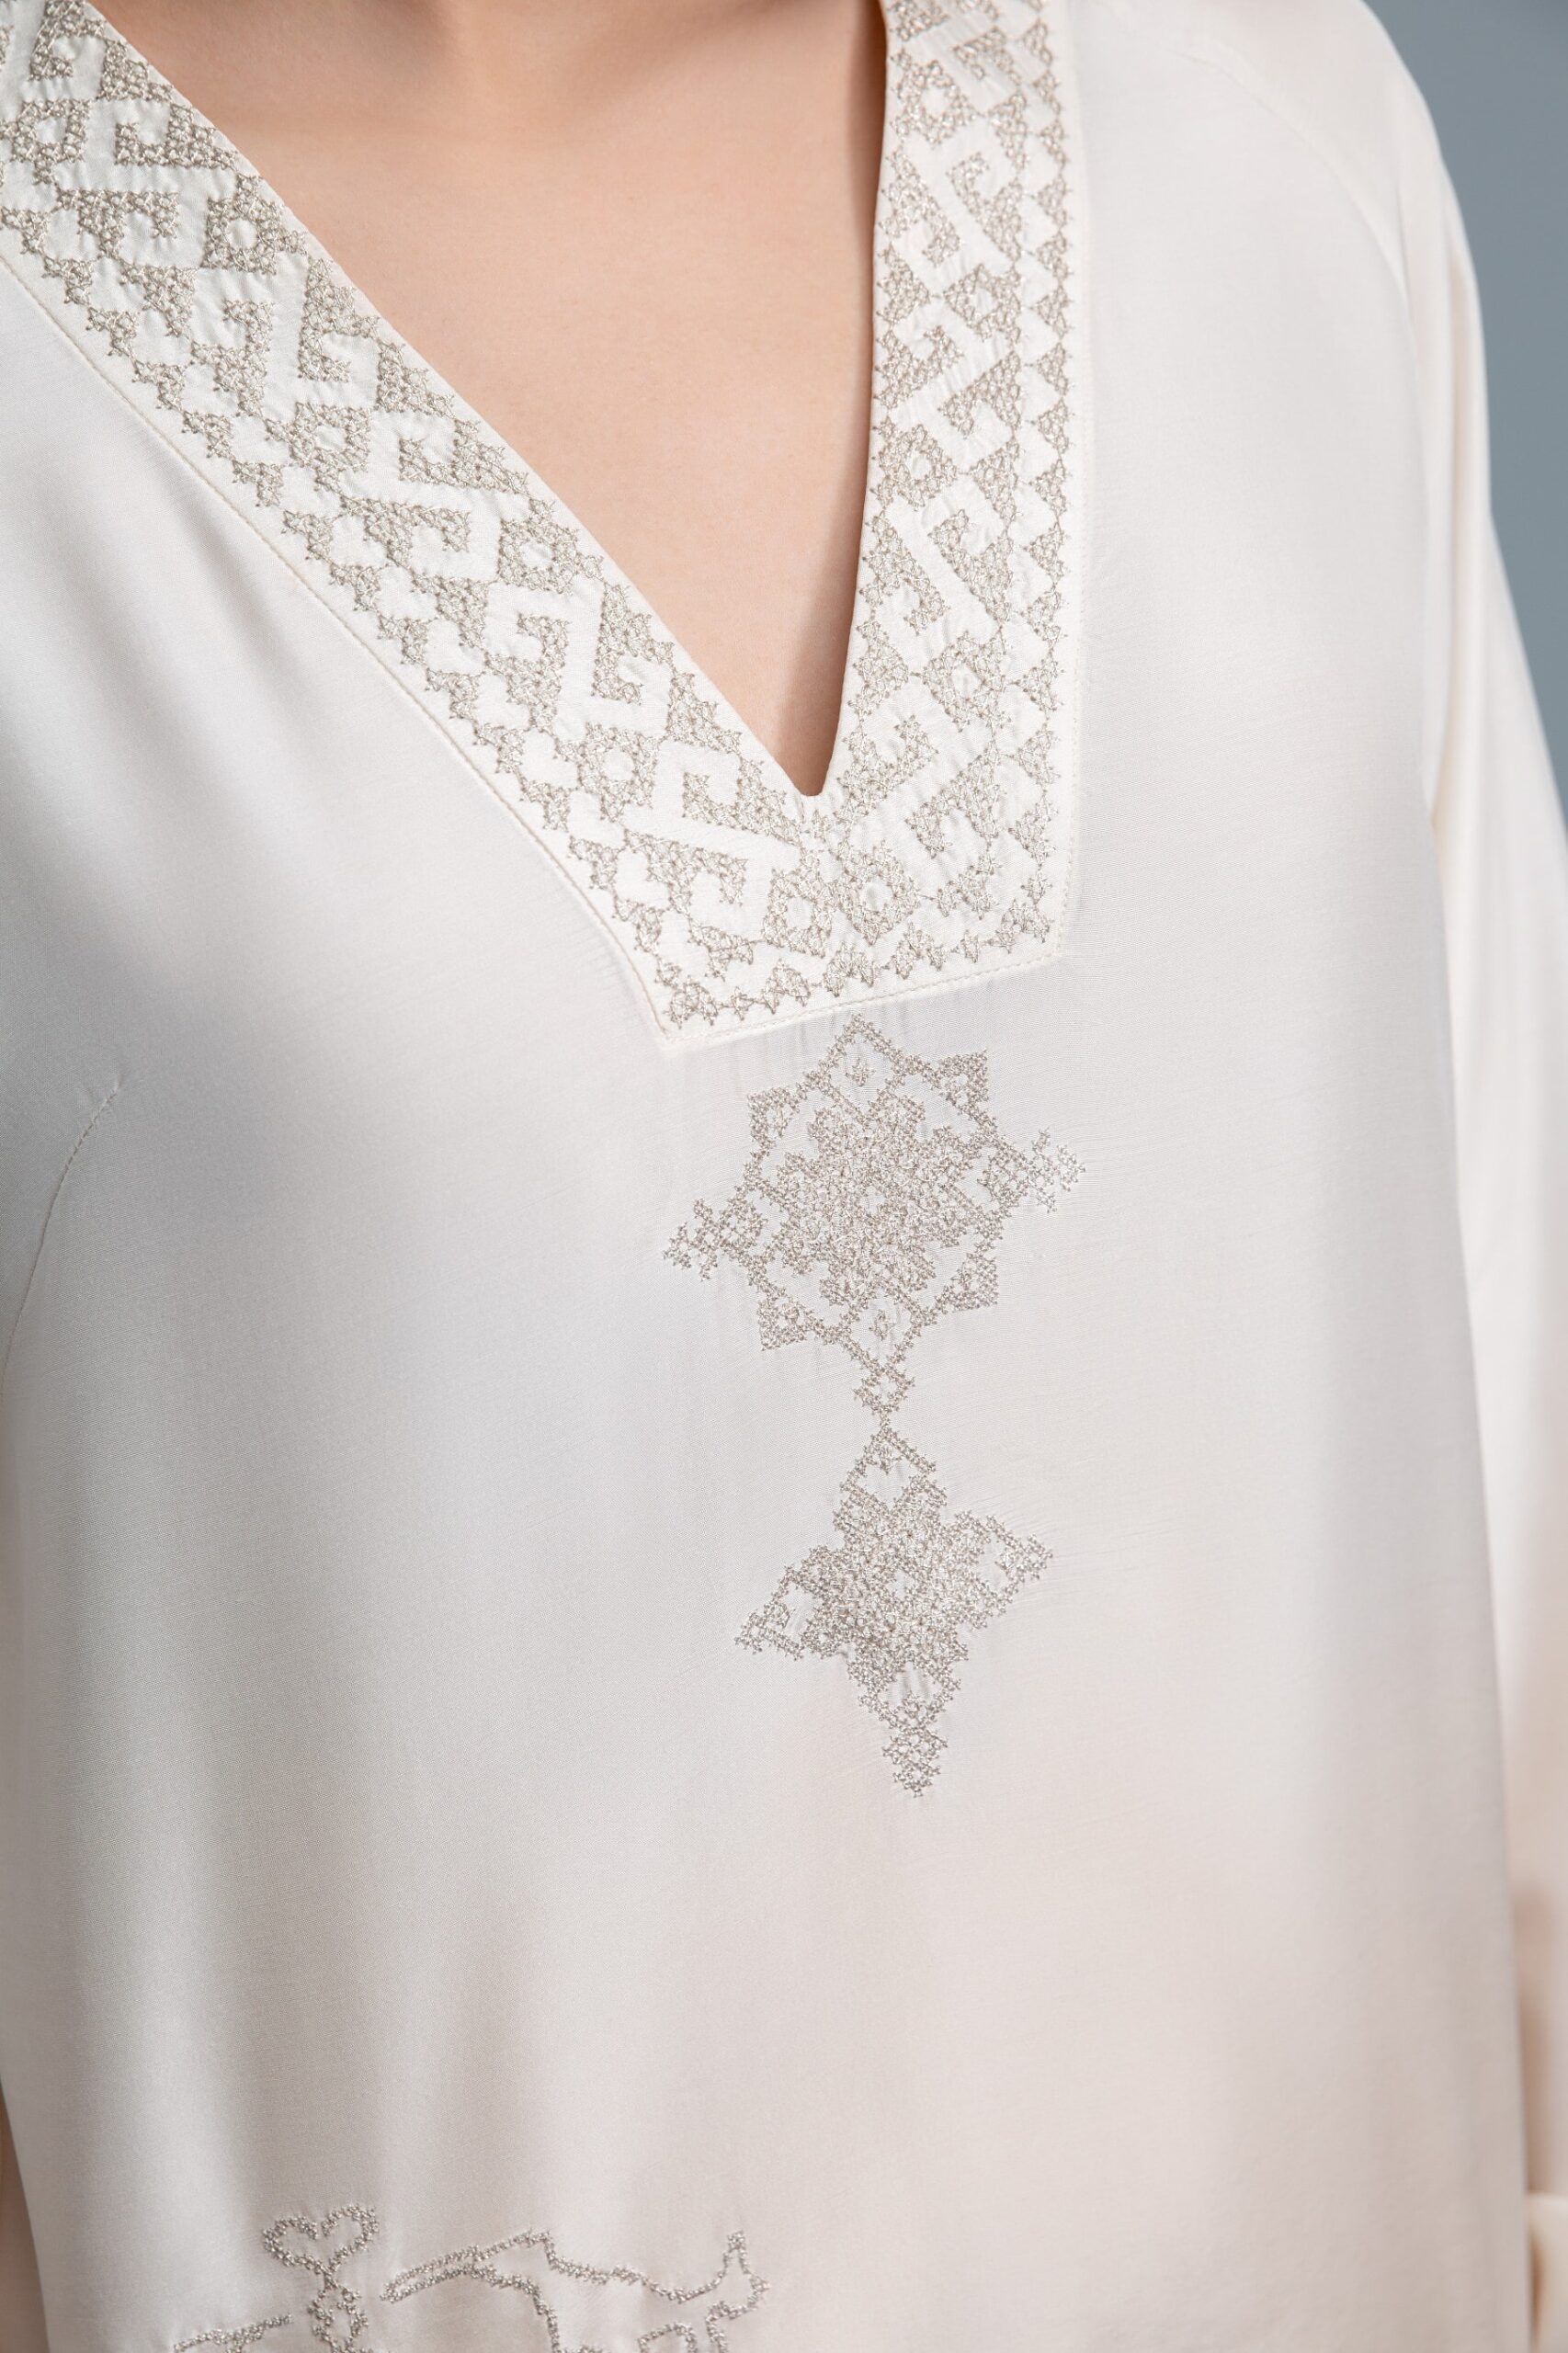 Blouse with embroidery 